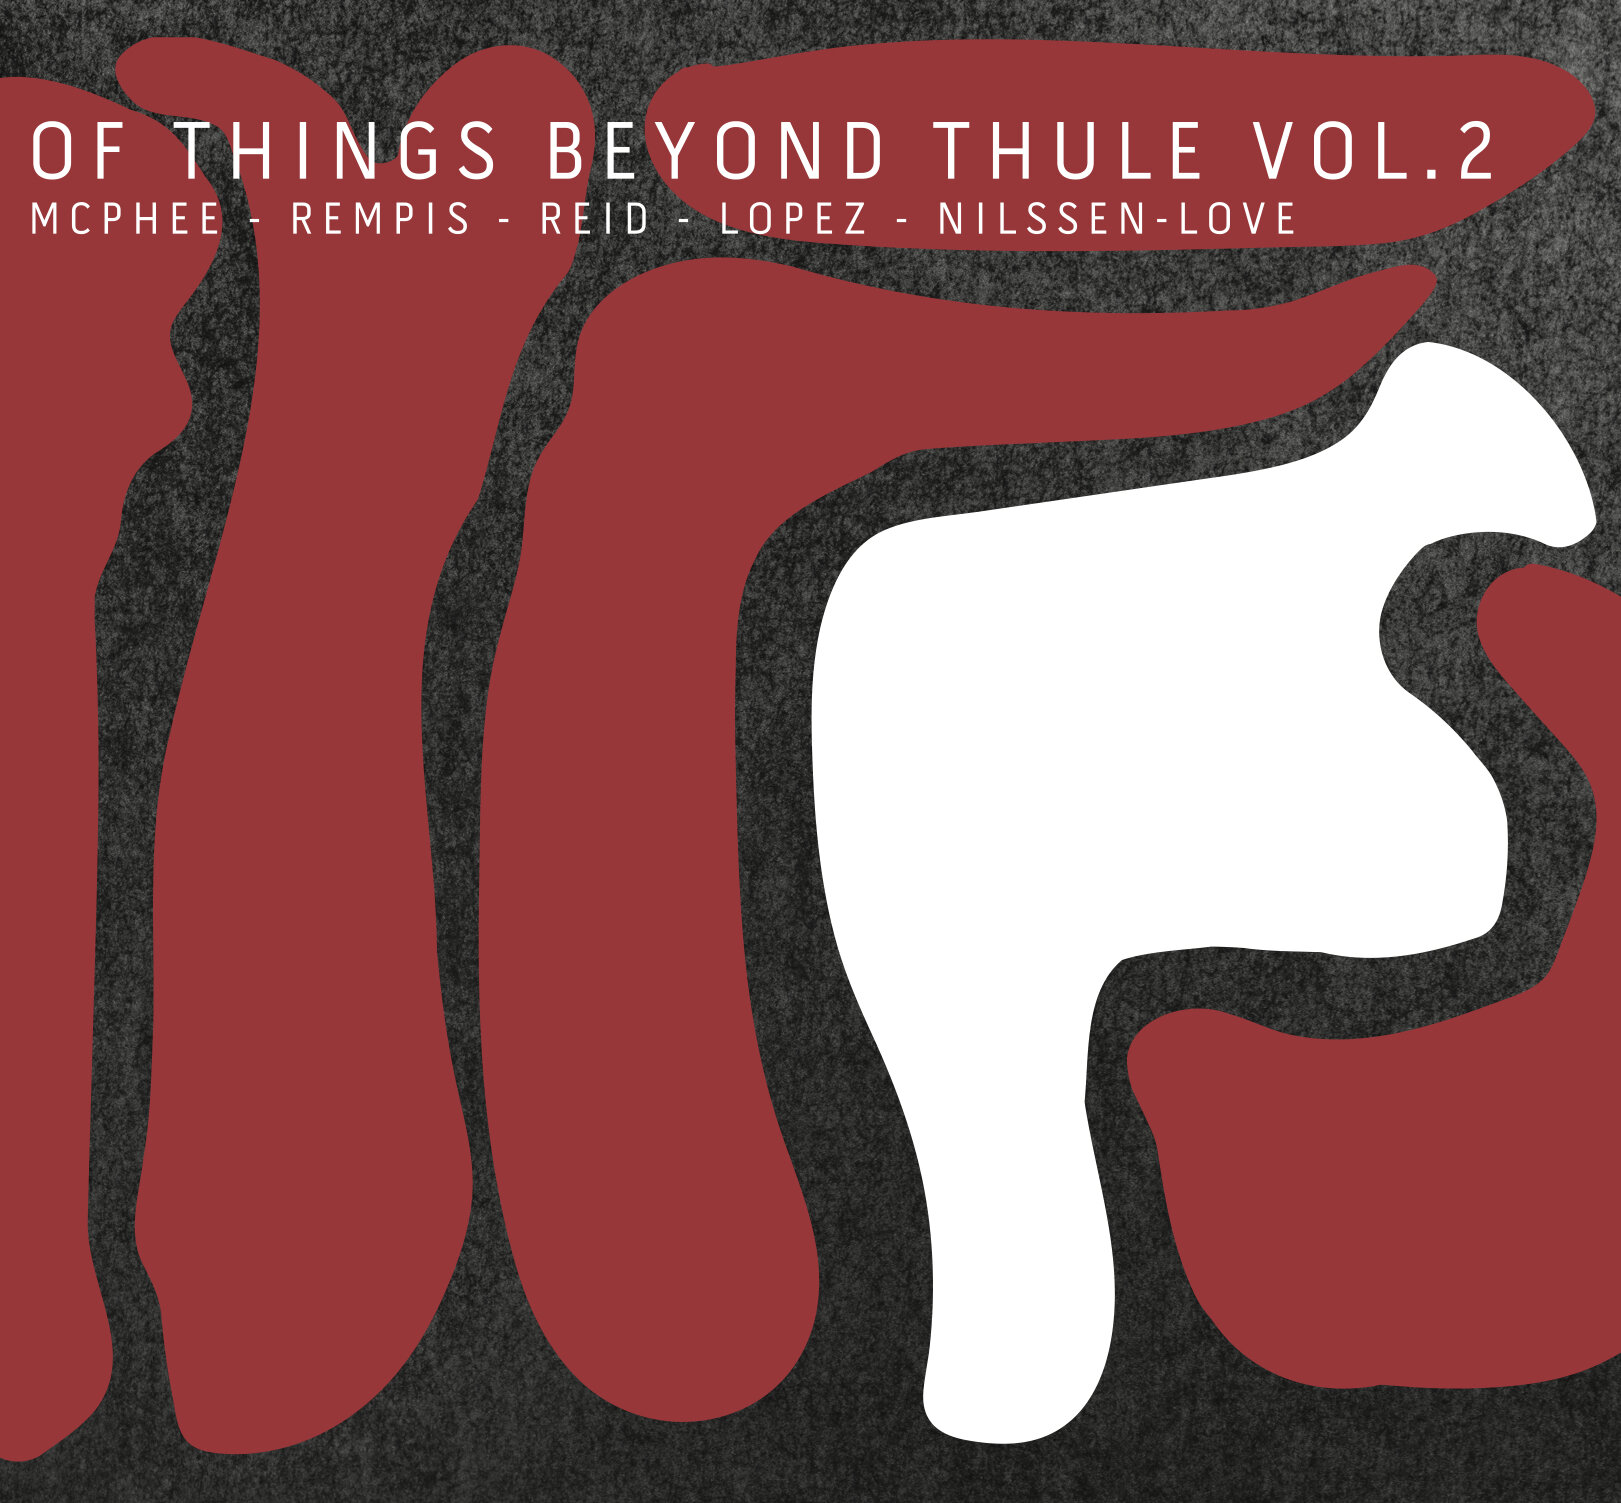 Of Thing Beyond Thule vol 2 Front Cover.jpg